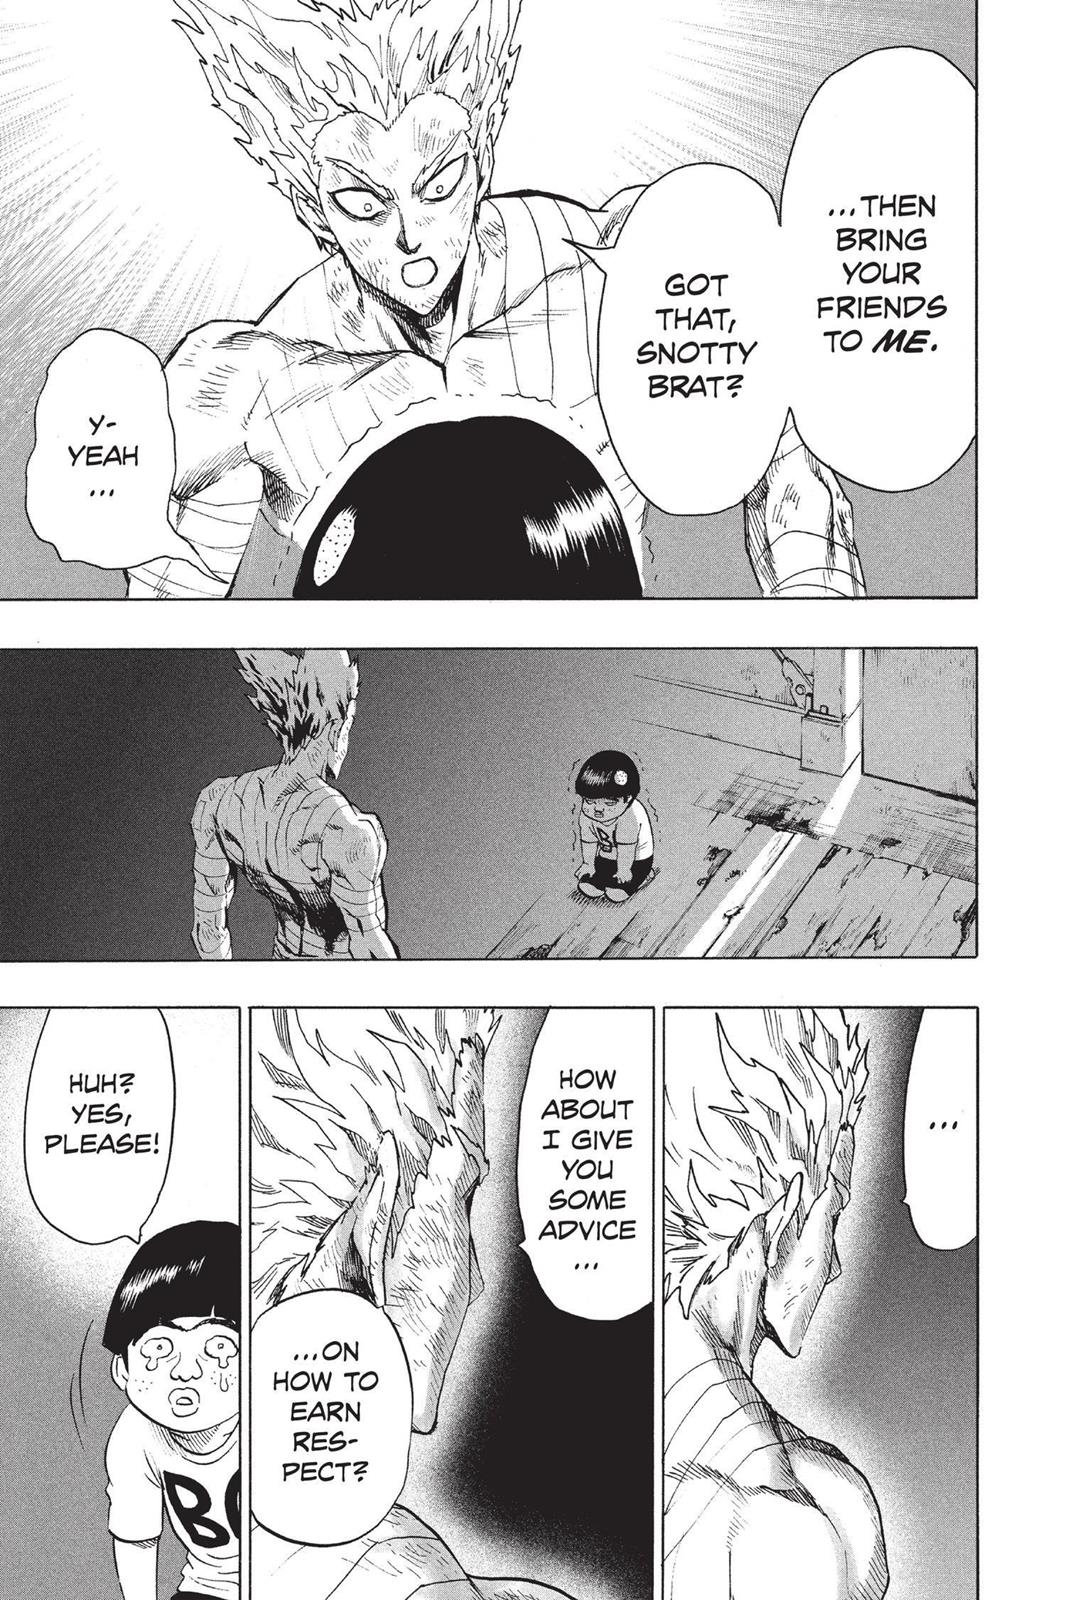 One-Punch Man, Punch 80 image 24